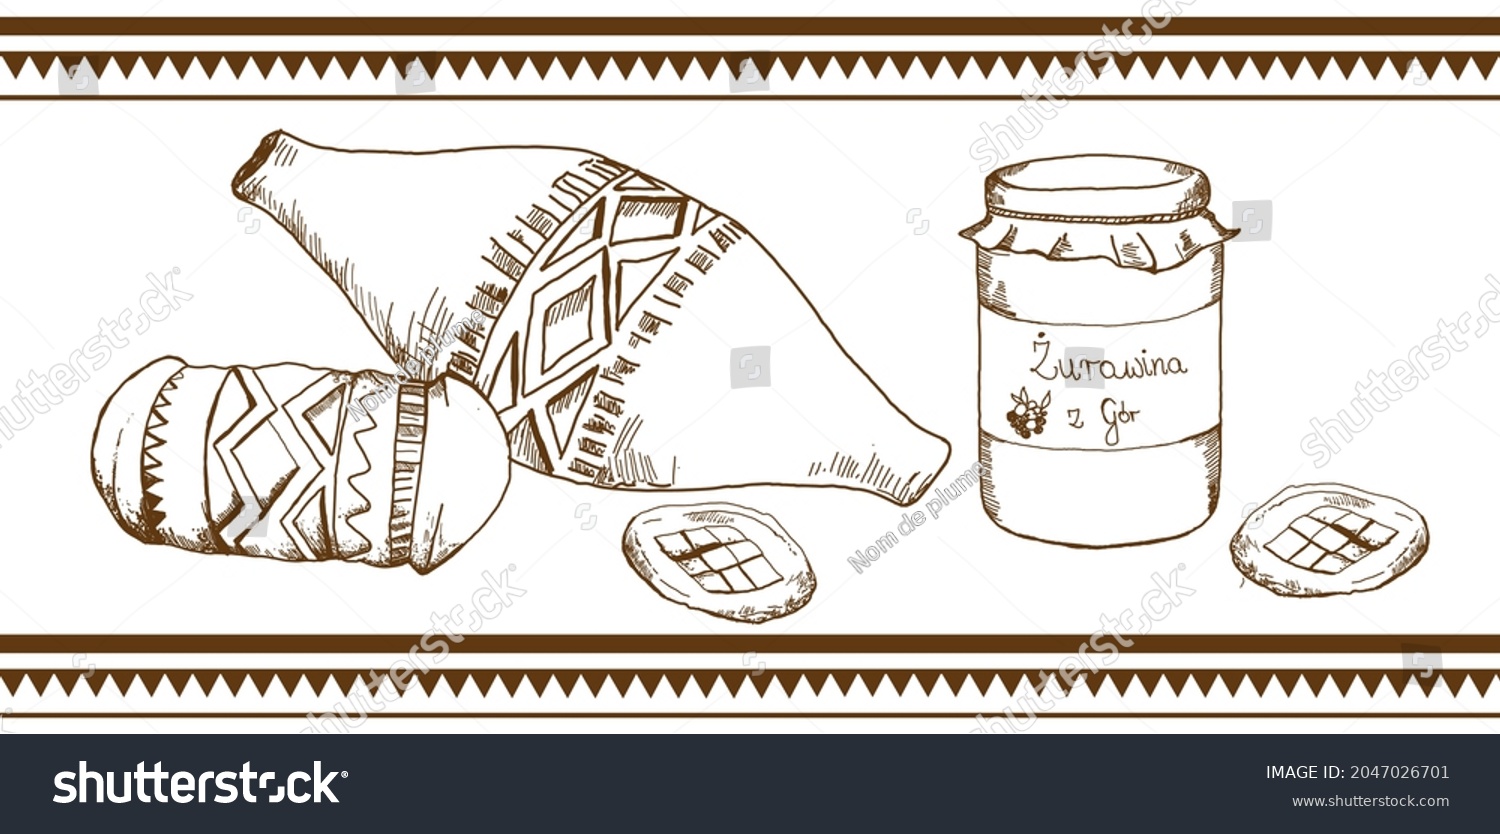 SVG of 
Brown graphics in a decorative frame presenting highlander cheese produced in Zakopane and a cranberry in a jar. svg